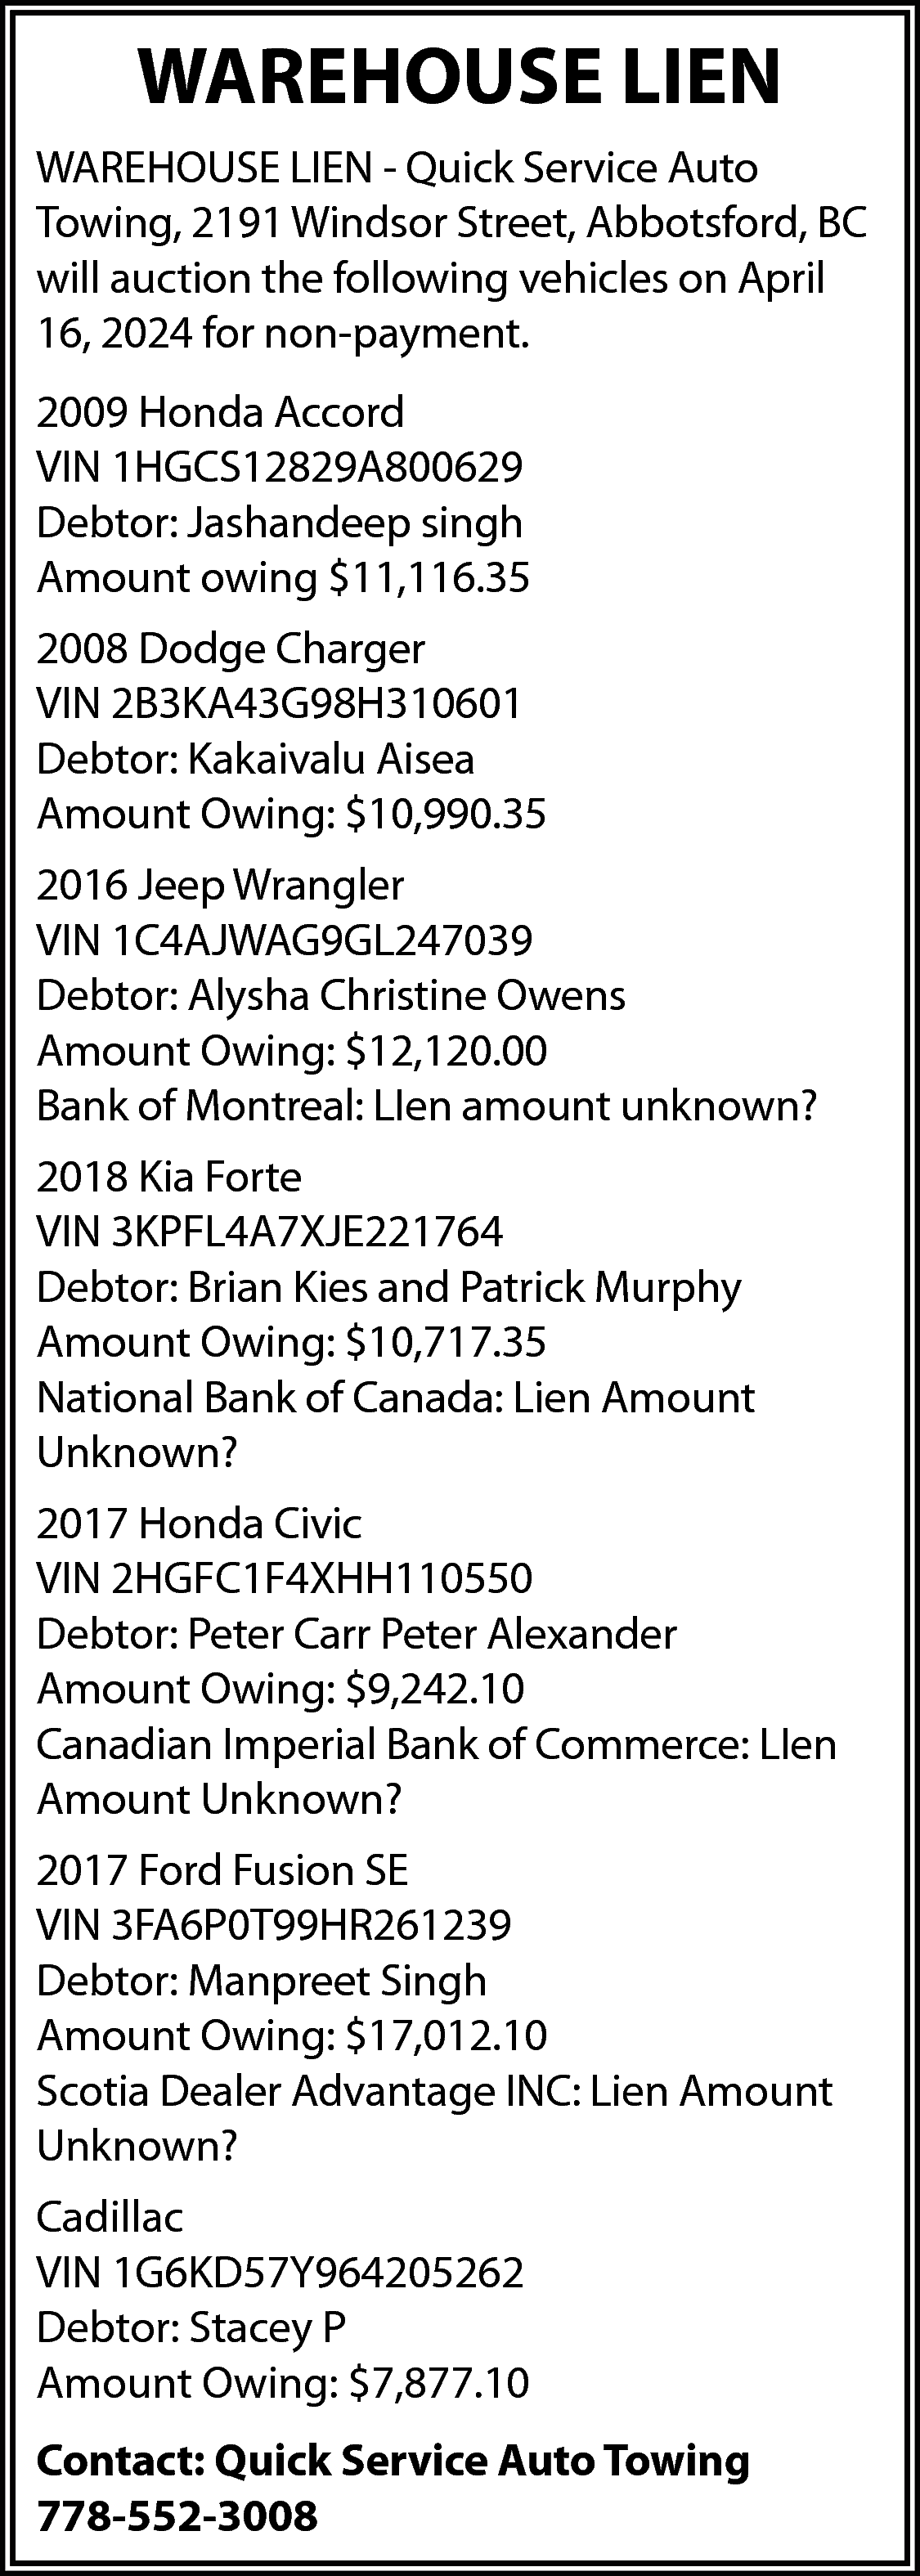 WAREHOUSE LIEN <br>WAREHOUSE LIEN -  WAREHOUSE LIEN  WAREHOUSE LIEN - Quick Service Auto  Towing, 2191 Windsor Street, Abbotsford, BC  will auction the following vehicles on April  16, 2024 for non-payment.  2009 Honda Accord  VIN 1HGCS12829A800629  Debtor: Jashandeep singh  Amount owing $11,116.35  2008 Dodge Charger  VIN 2B3KA43G98H310601  Debtor: Kakaivalu Aisea  Amount Owing: $10,990.35  2016 Jeep Wrangler  VIN 1C4AJWAG9GL247039  Debtor: Alysha Christine Owens  Amount Owing: $12,120.00  Bank of Montreal: LIen amount unknown?  2018 Kia Forte  VIN 3KPFL4A7XJE221764  Debtor: Brian Kies and Patrick Murphy  Amount Owing: $10,717.35  National Bank of Canada: Lien Amount  Unknown?  2017 Honda Civic  VIN 2HGFC1F4XHH110550  Debtor: Peter Carr Peter Alexander  Amount Owing: $9,242.10  Canadian Imperial Bank of Commerce: LIen  Amount Unknown?  2017 Ford Fusion SE  VIN 3FA6P0T99HR261239  Debtor: Manpreet Singh  Amount Owing: $17,012.10  Scotia Dealer Advantage INC: Lien Amount  Unknown?  Cadillac  VIN 1G6KD57Y964205262  Debtor: Stacey P  Amount Owing: $7,877.10  Contact: Quick Service Auto Towing  778-552-3008    